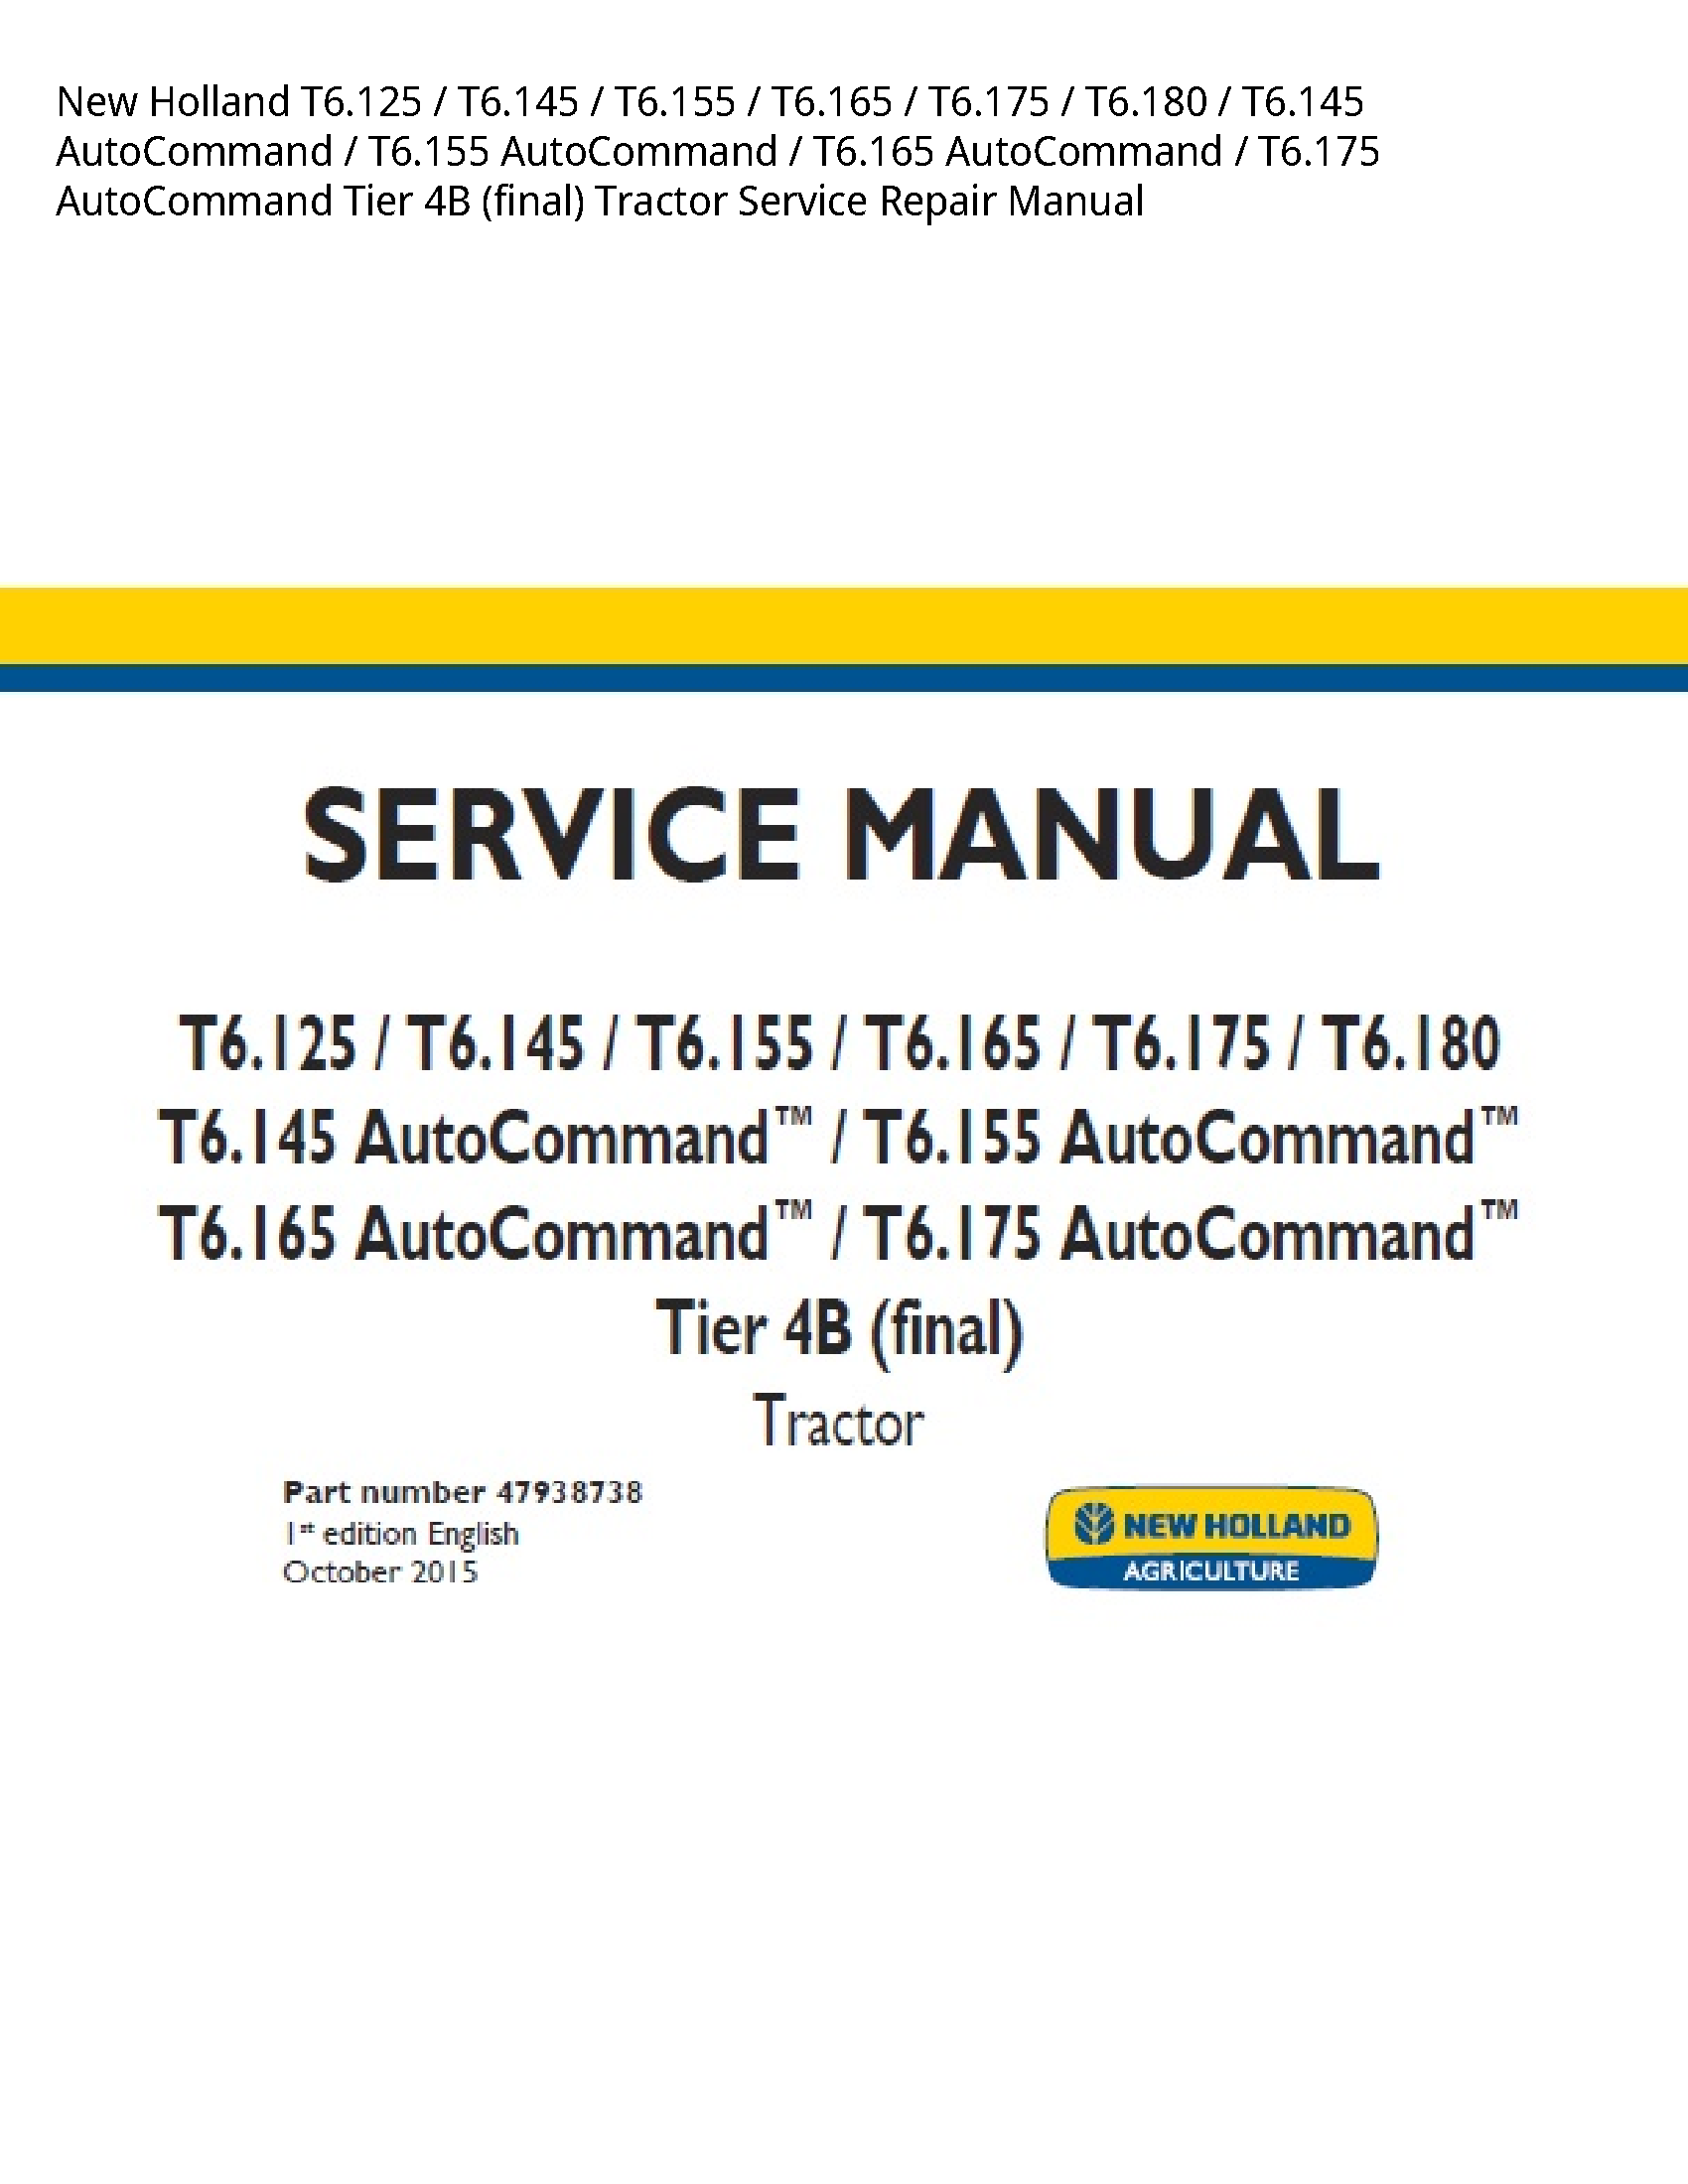 New Holland T6.125 AutoCommand AutoCommand AutoCommand AutoCommand Tier (final) Tractor manual